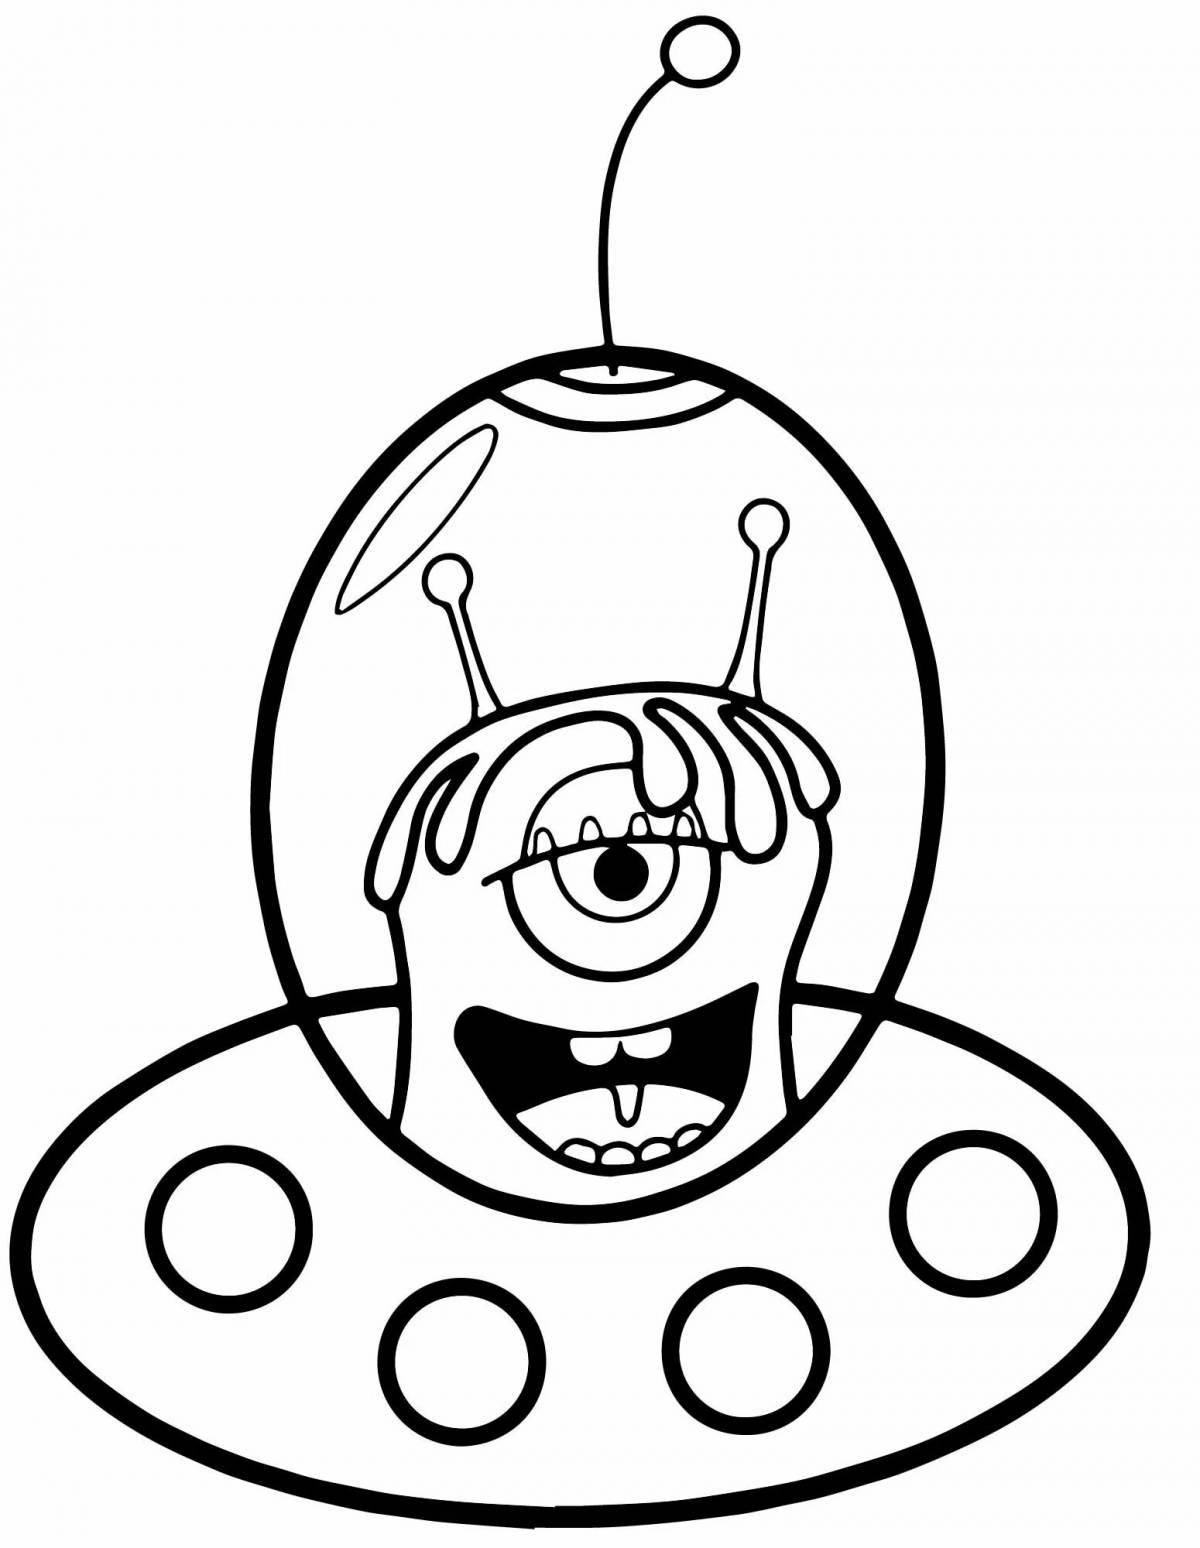 Coloring page happy aliens for kids